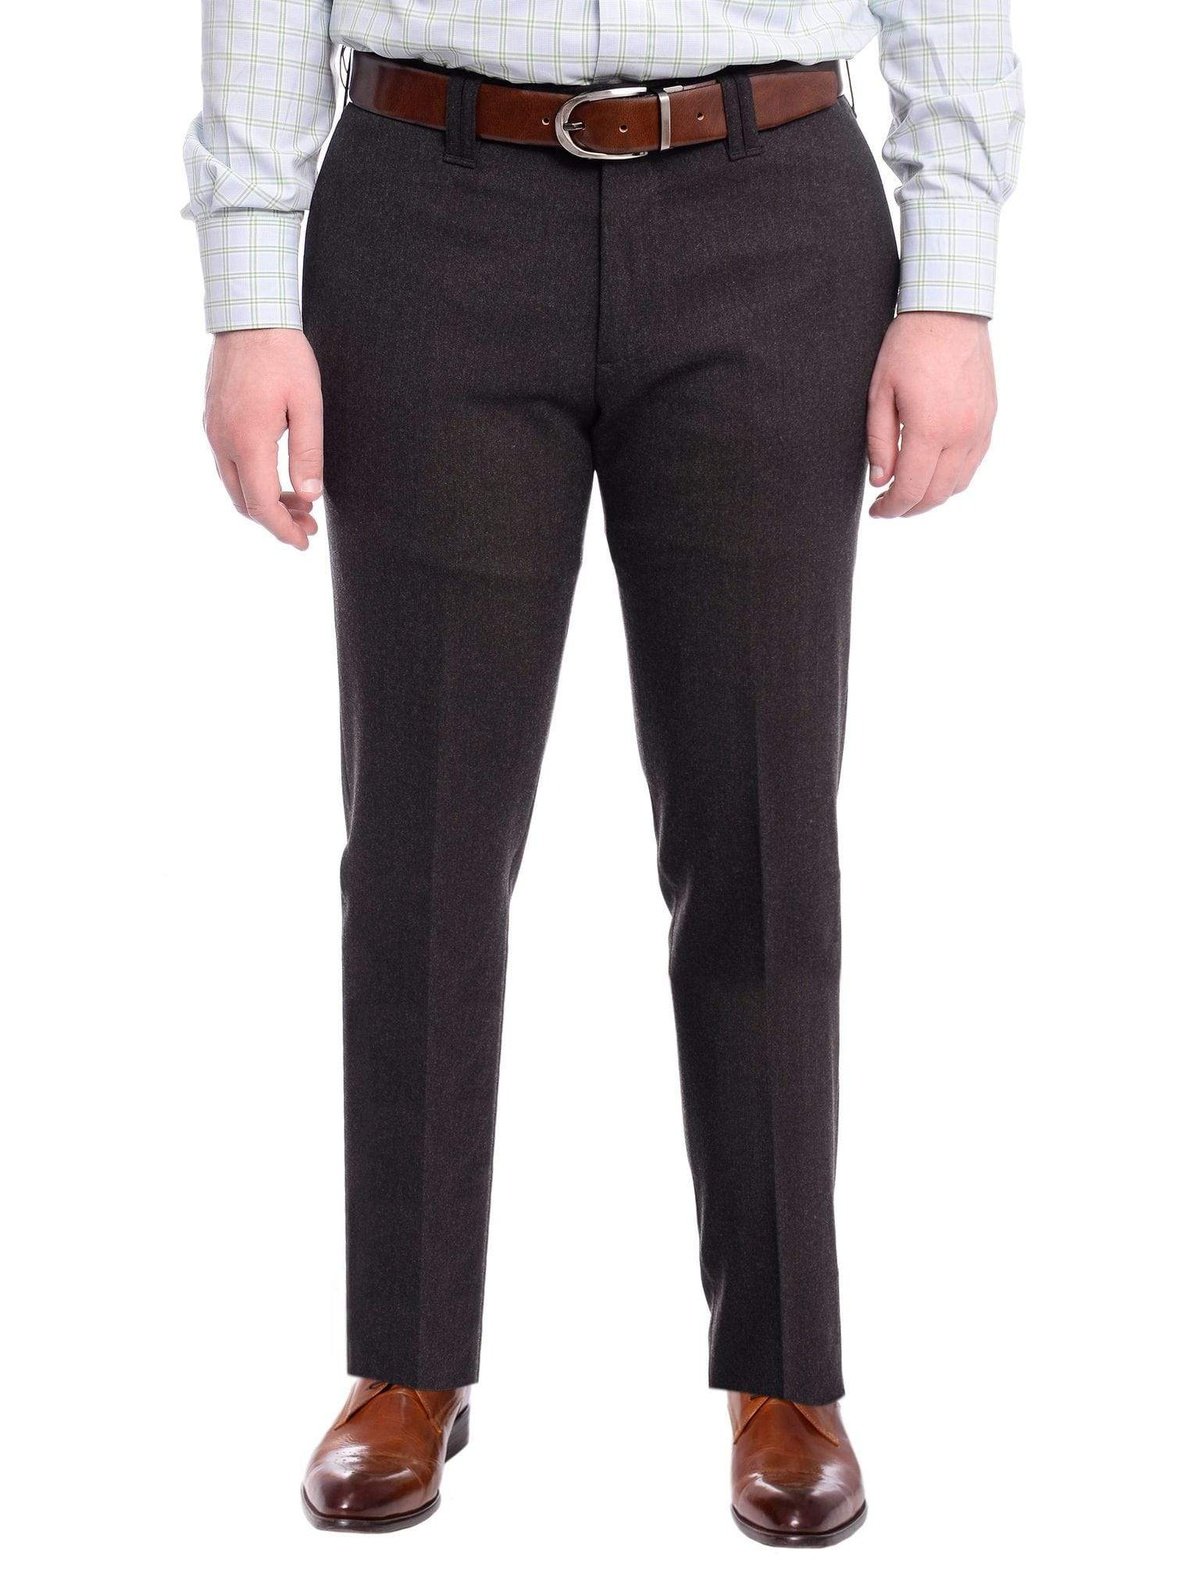 Napoli PANTS Napoli Slim Fit Solid Gray Charcoal Flat Front Flannel Wool Dress Pants